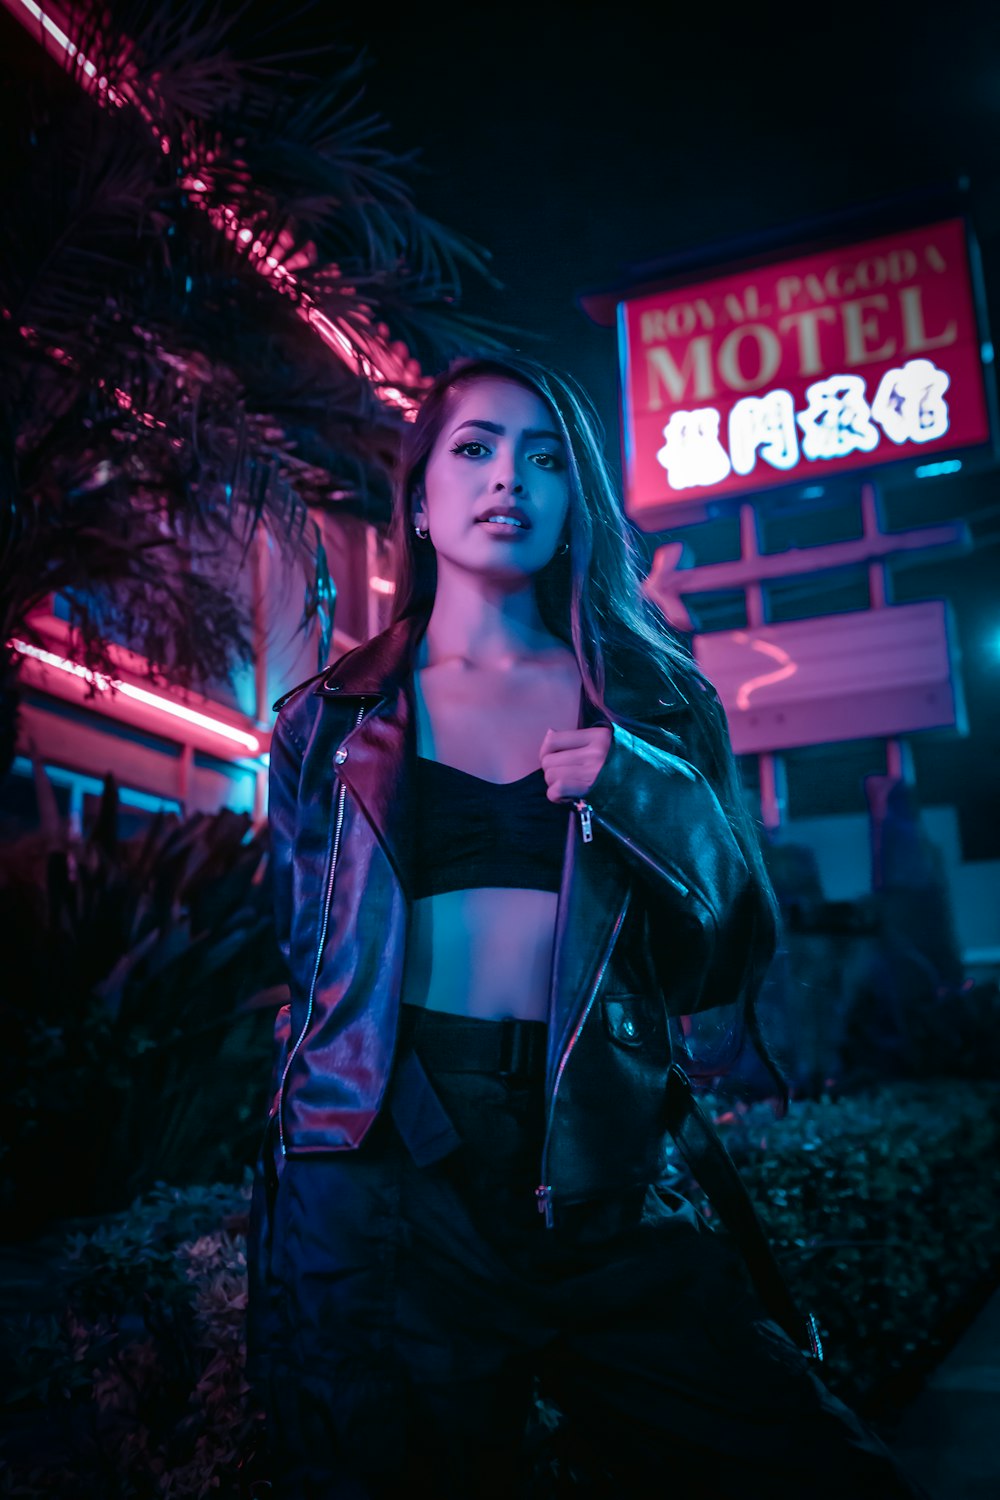 woman in black leather jacket standing near red and white neon signage during nighttime